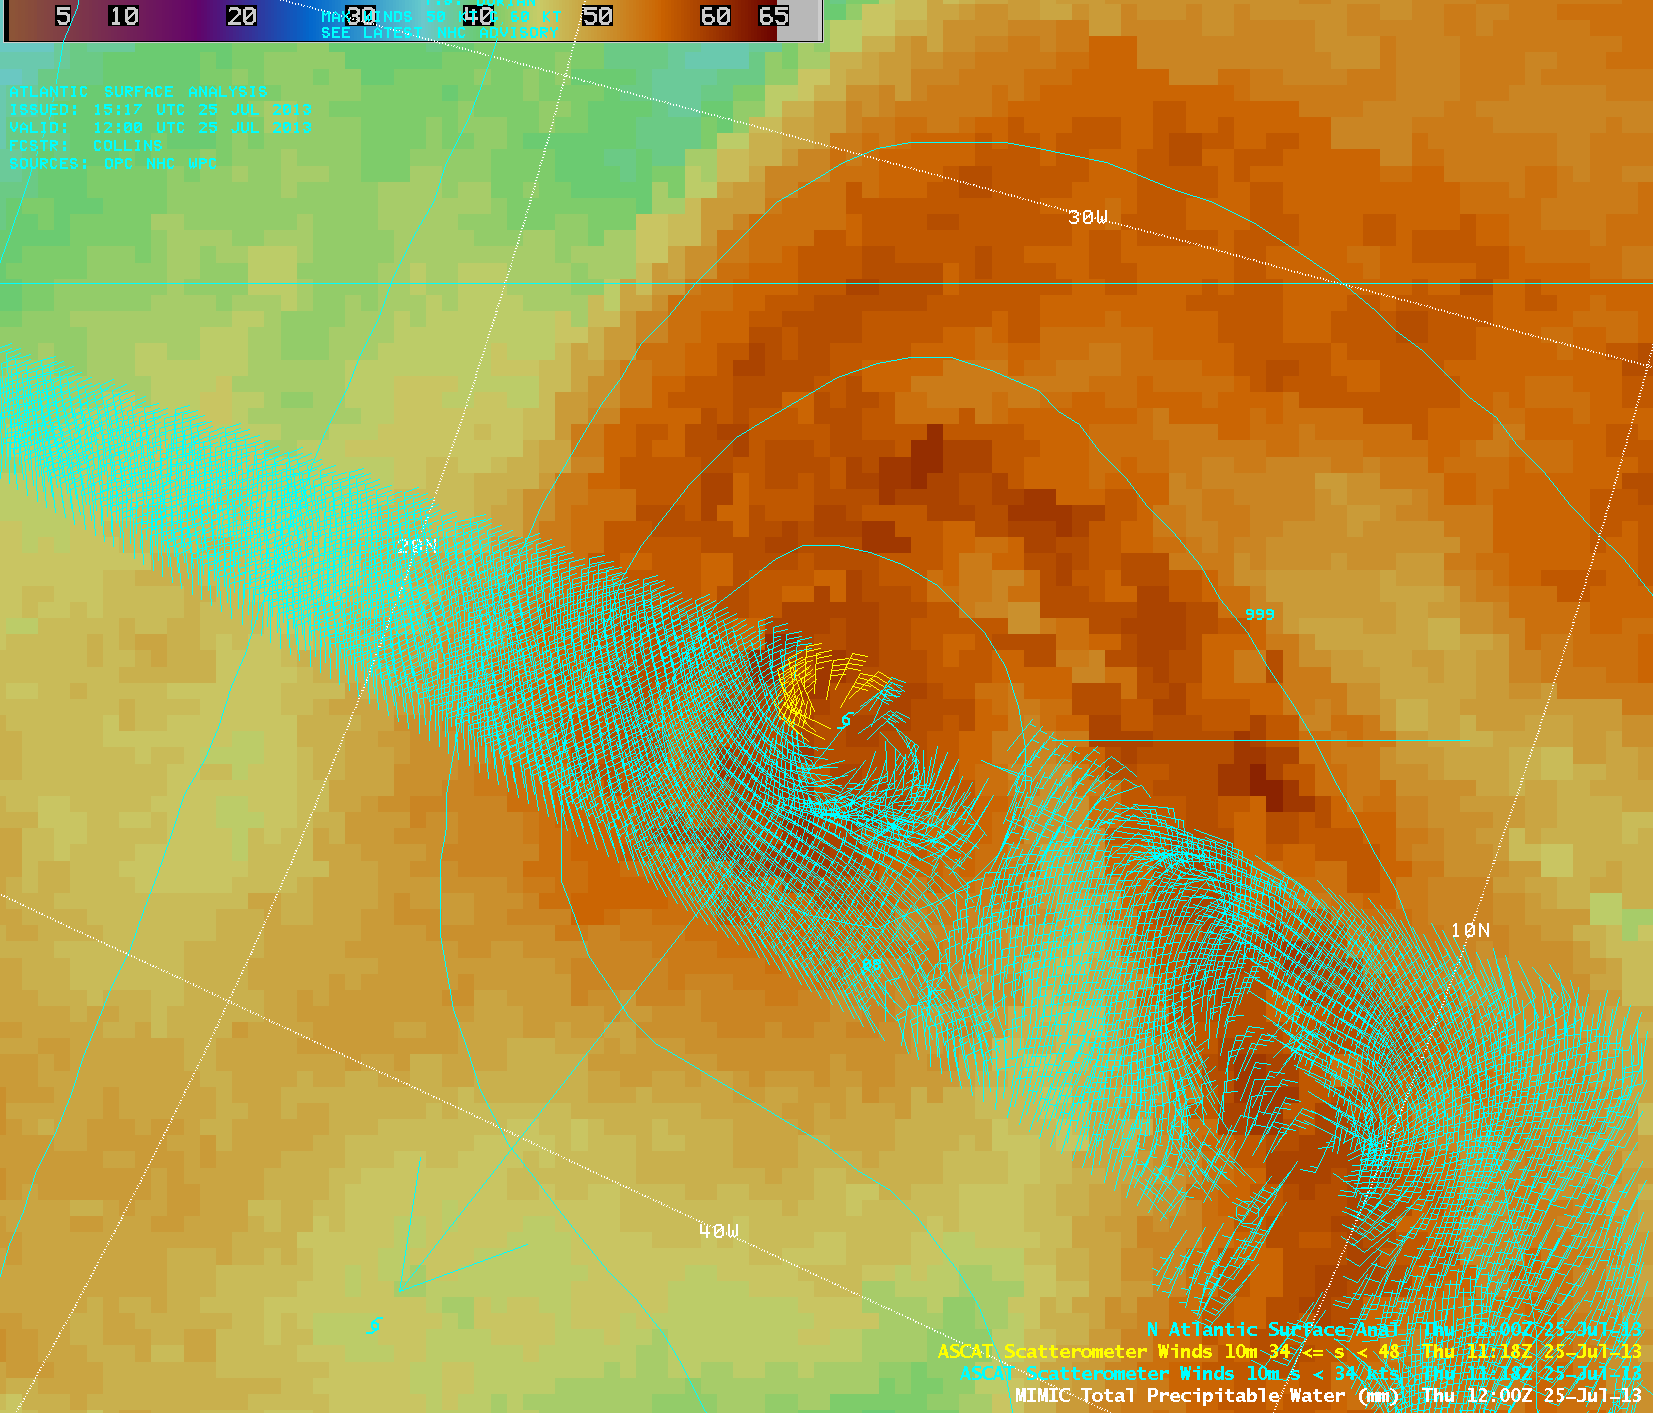 ASCAT Scatterometer winds, and Total Precipitable Water, around 1100 UTC on 25 July 2013